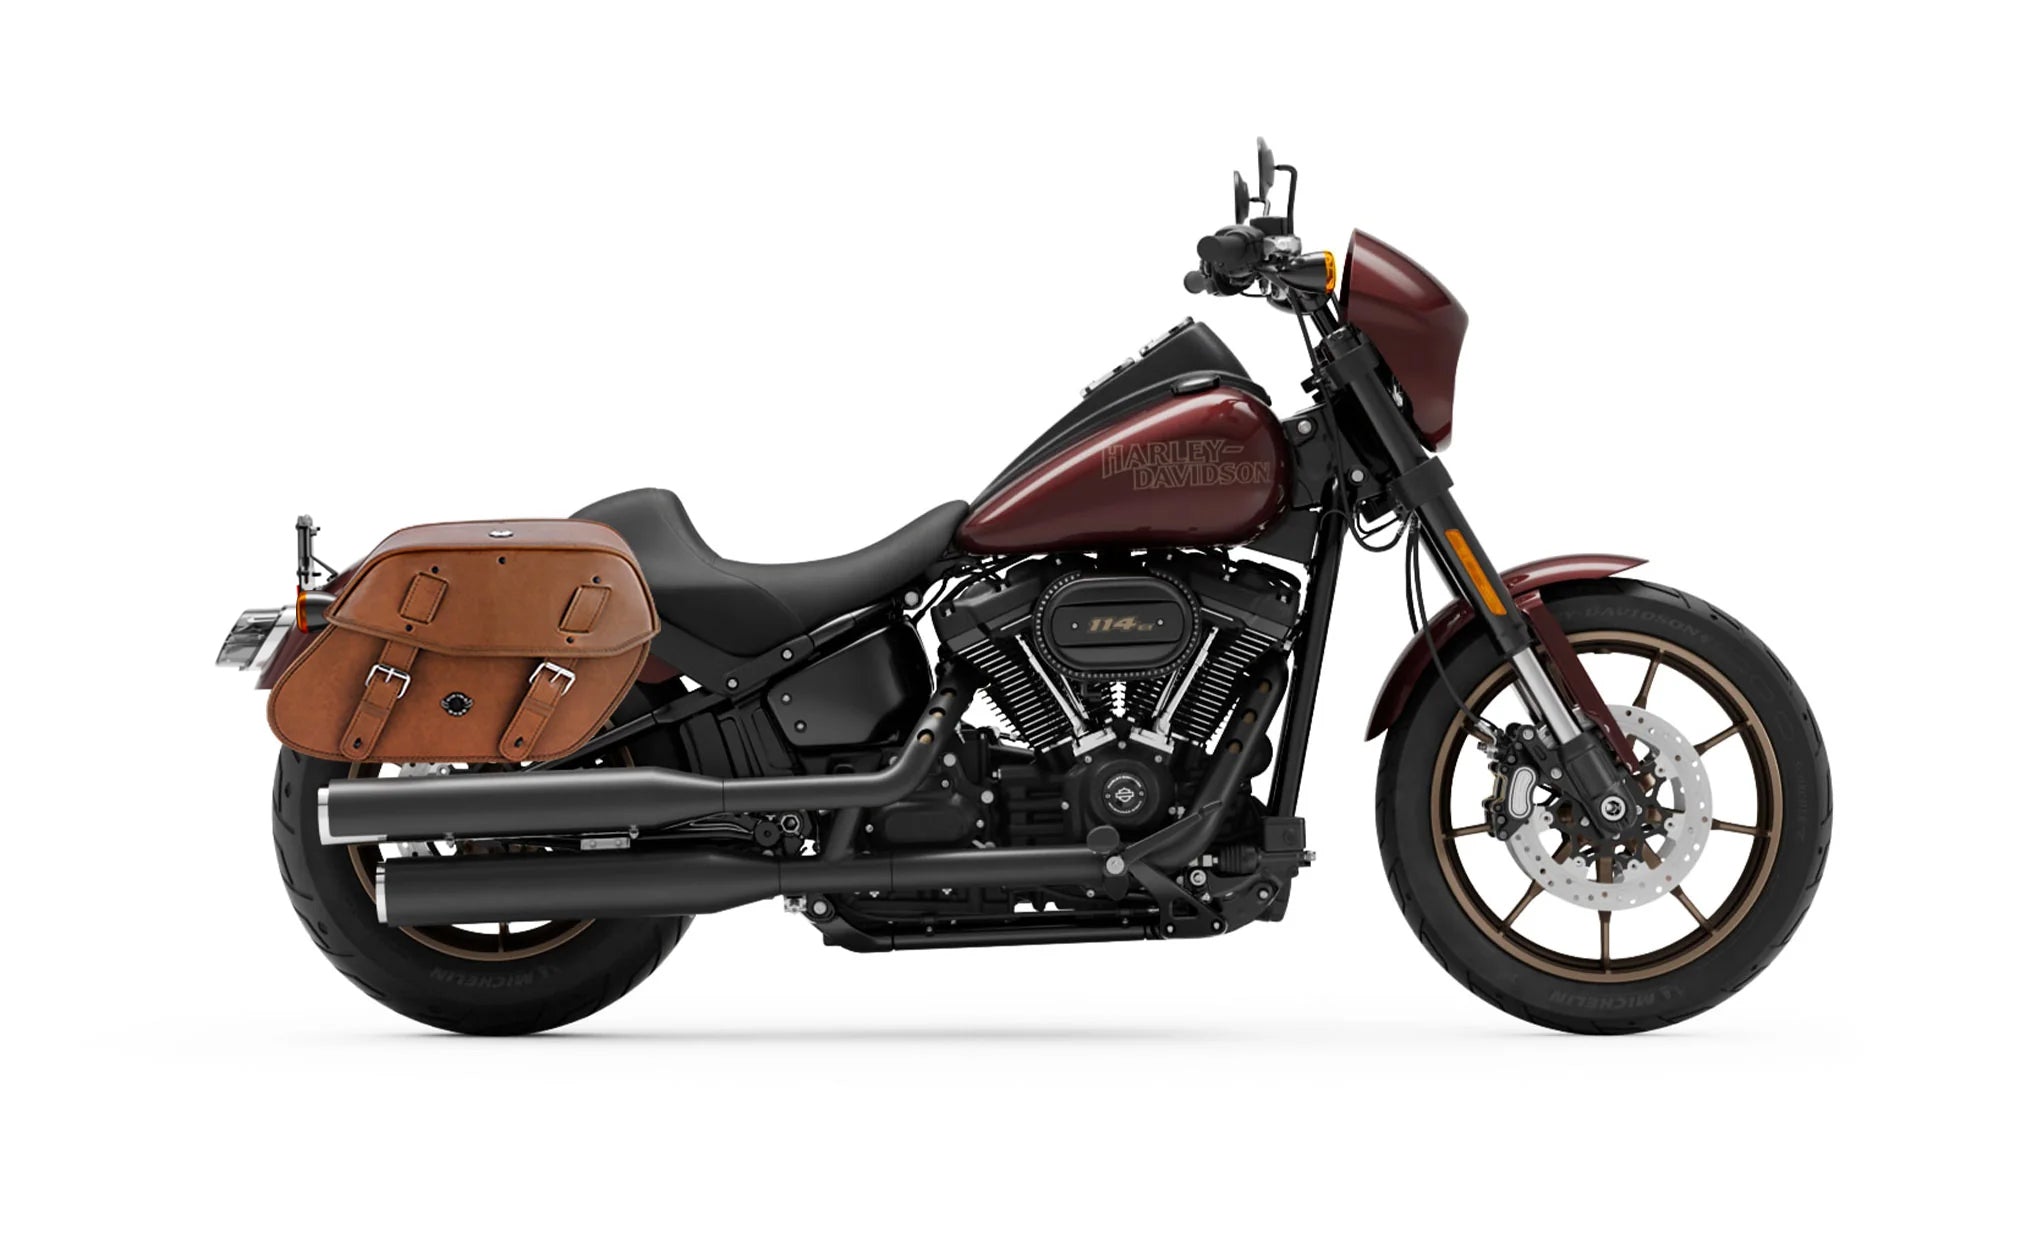 Viking Odin Brown Large Leather Motorcycle Saddlebags For Harley Softail Low Rider S Fxlrs on Bike Photo @expand